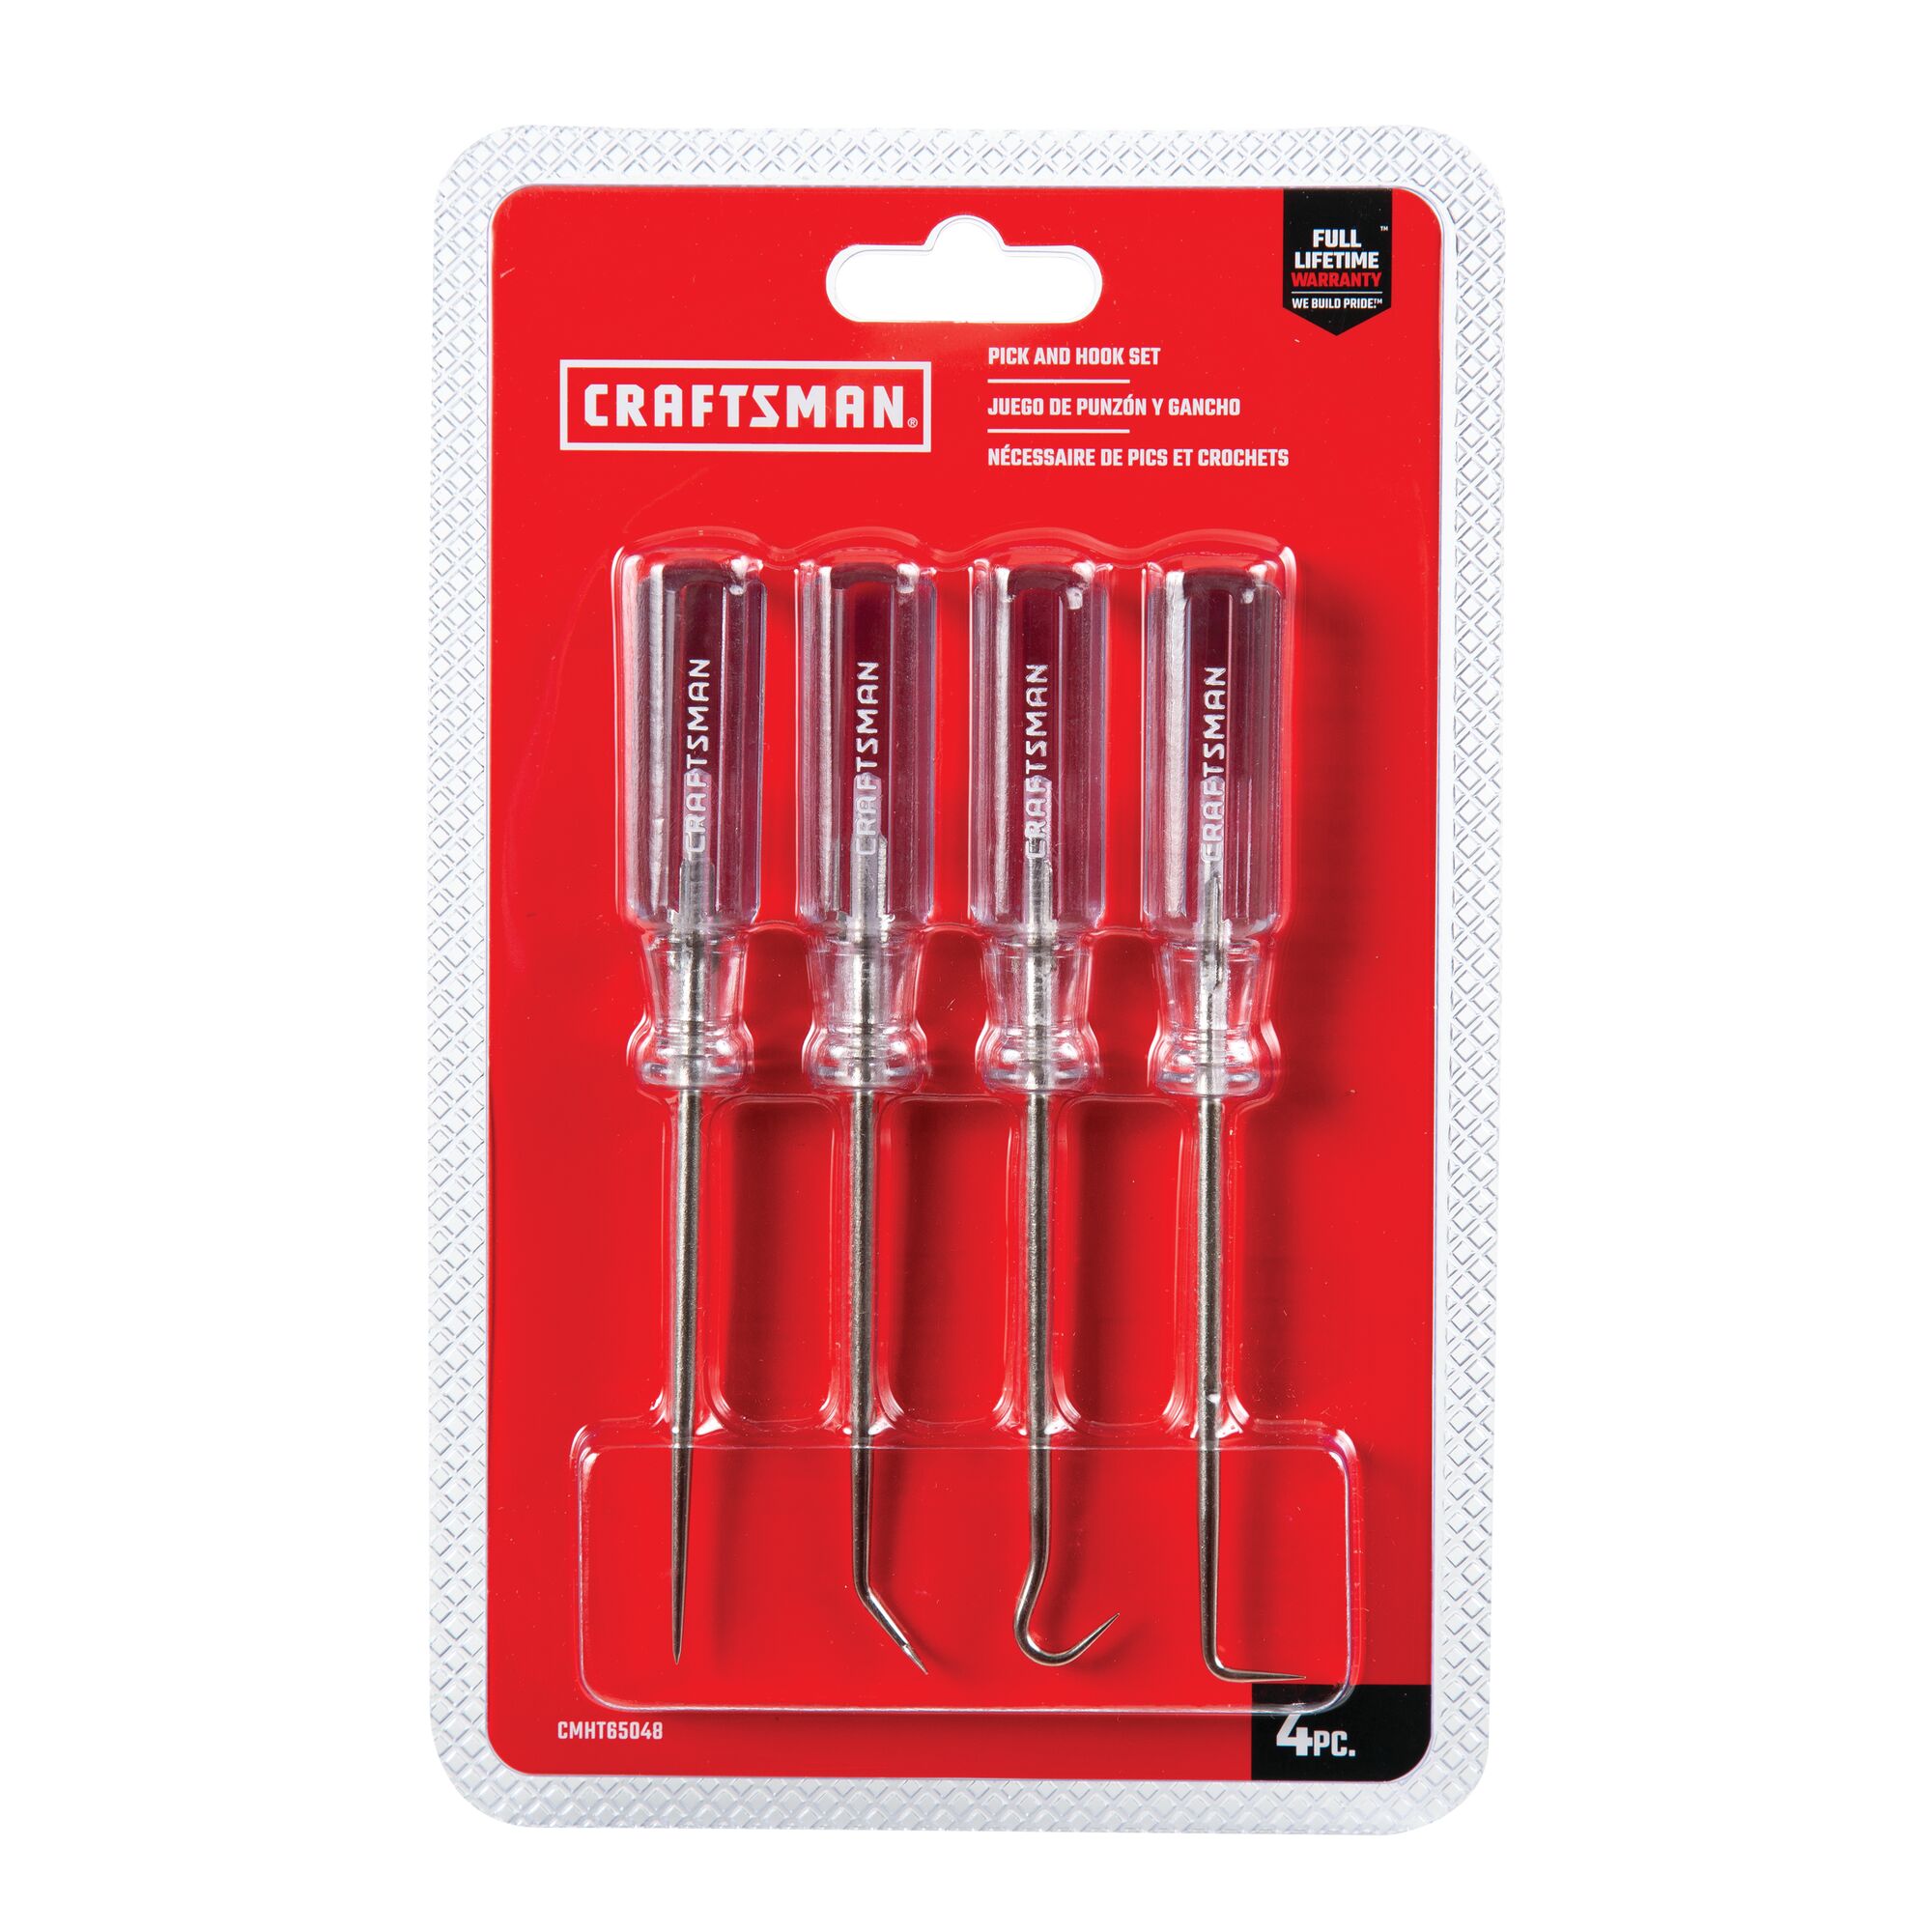 4 piece Pick and Hook Acetate ScrewDriver Set in carded blister packaging.